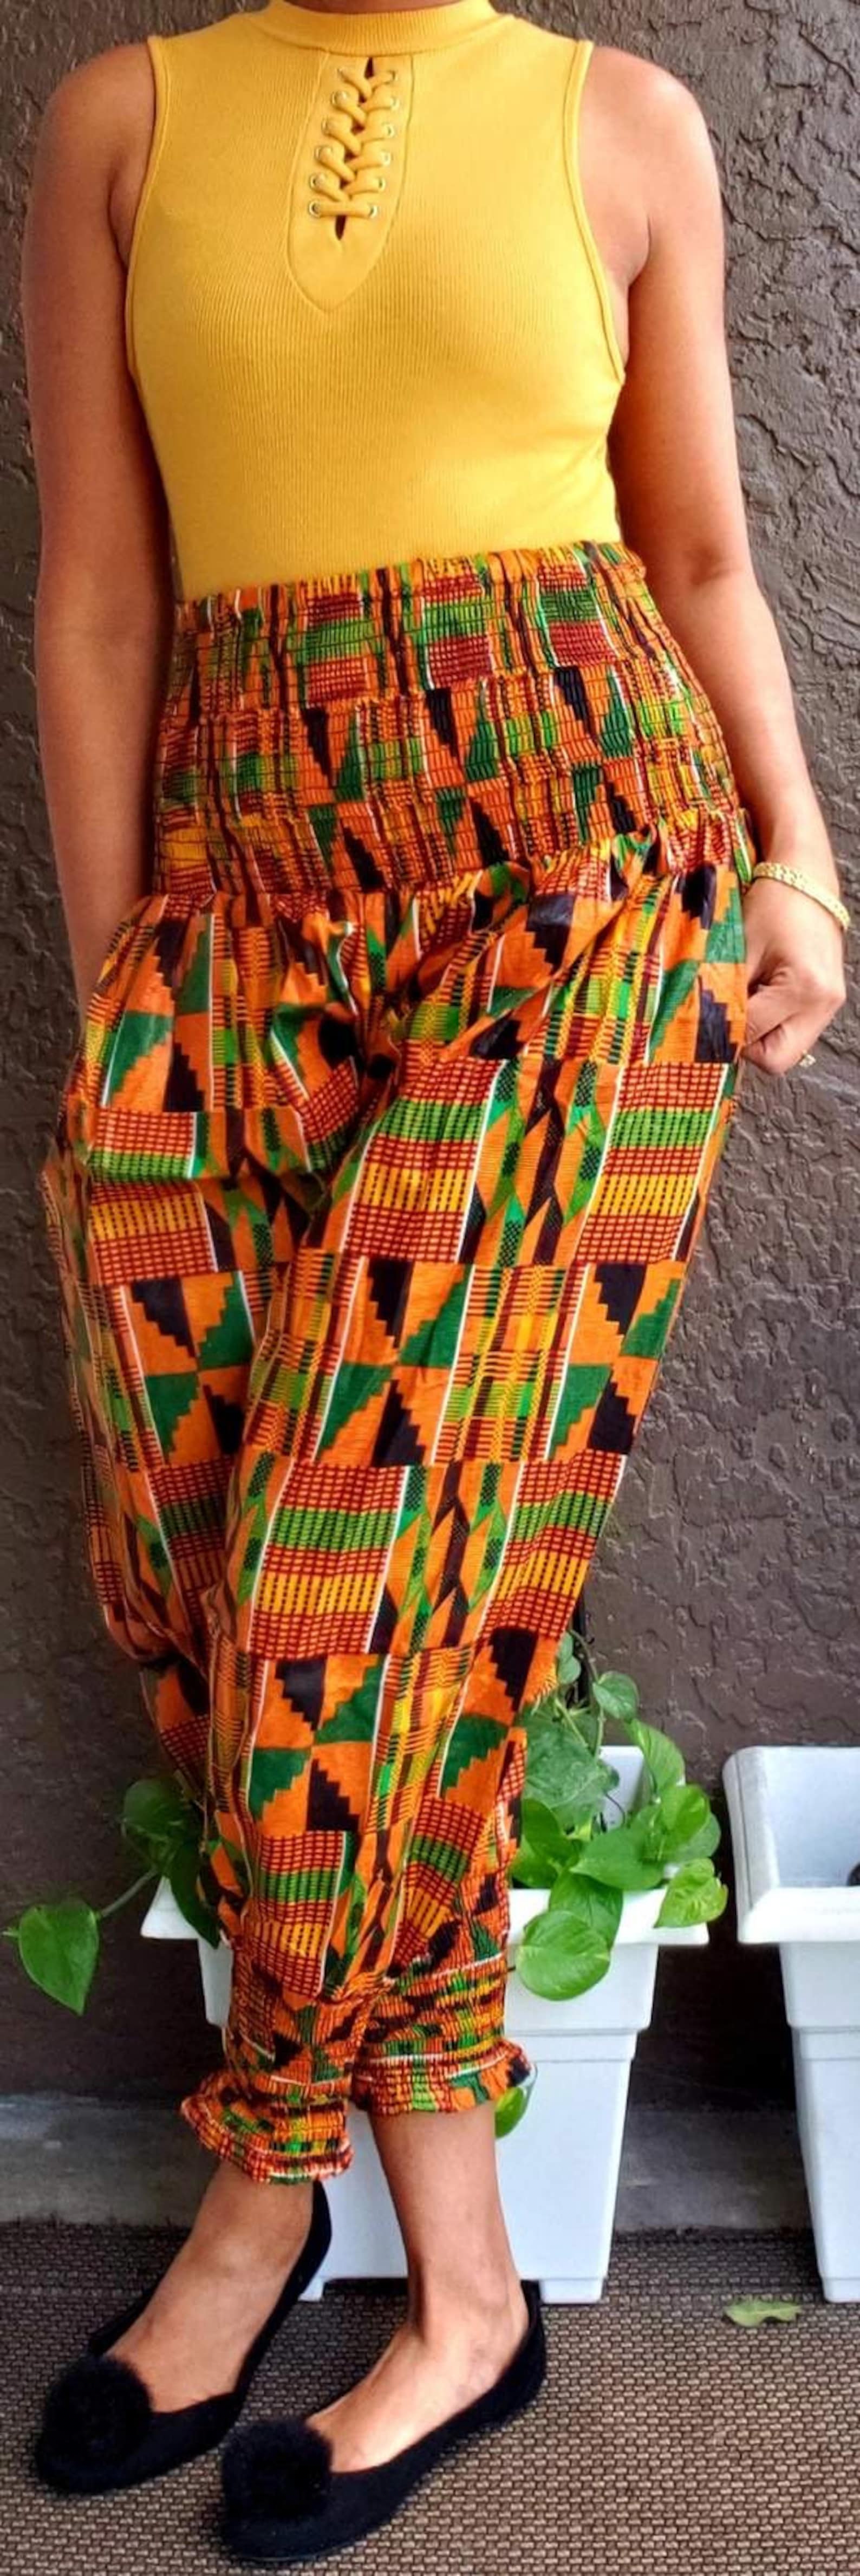 What to wear to. areggae concert: African Print pants